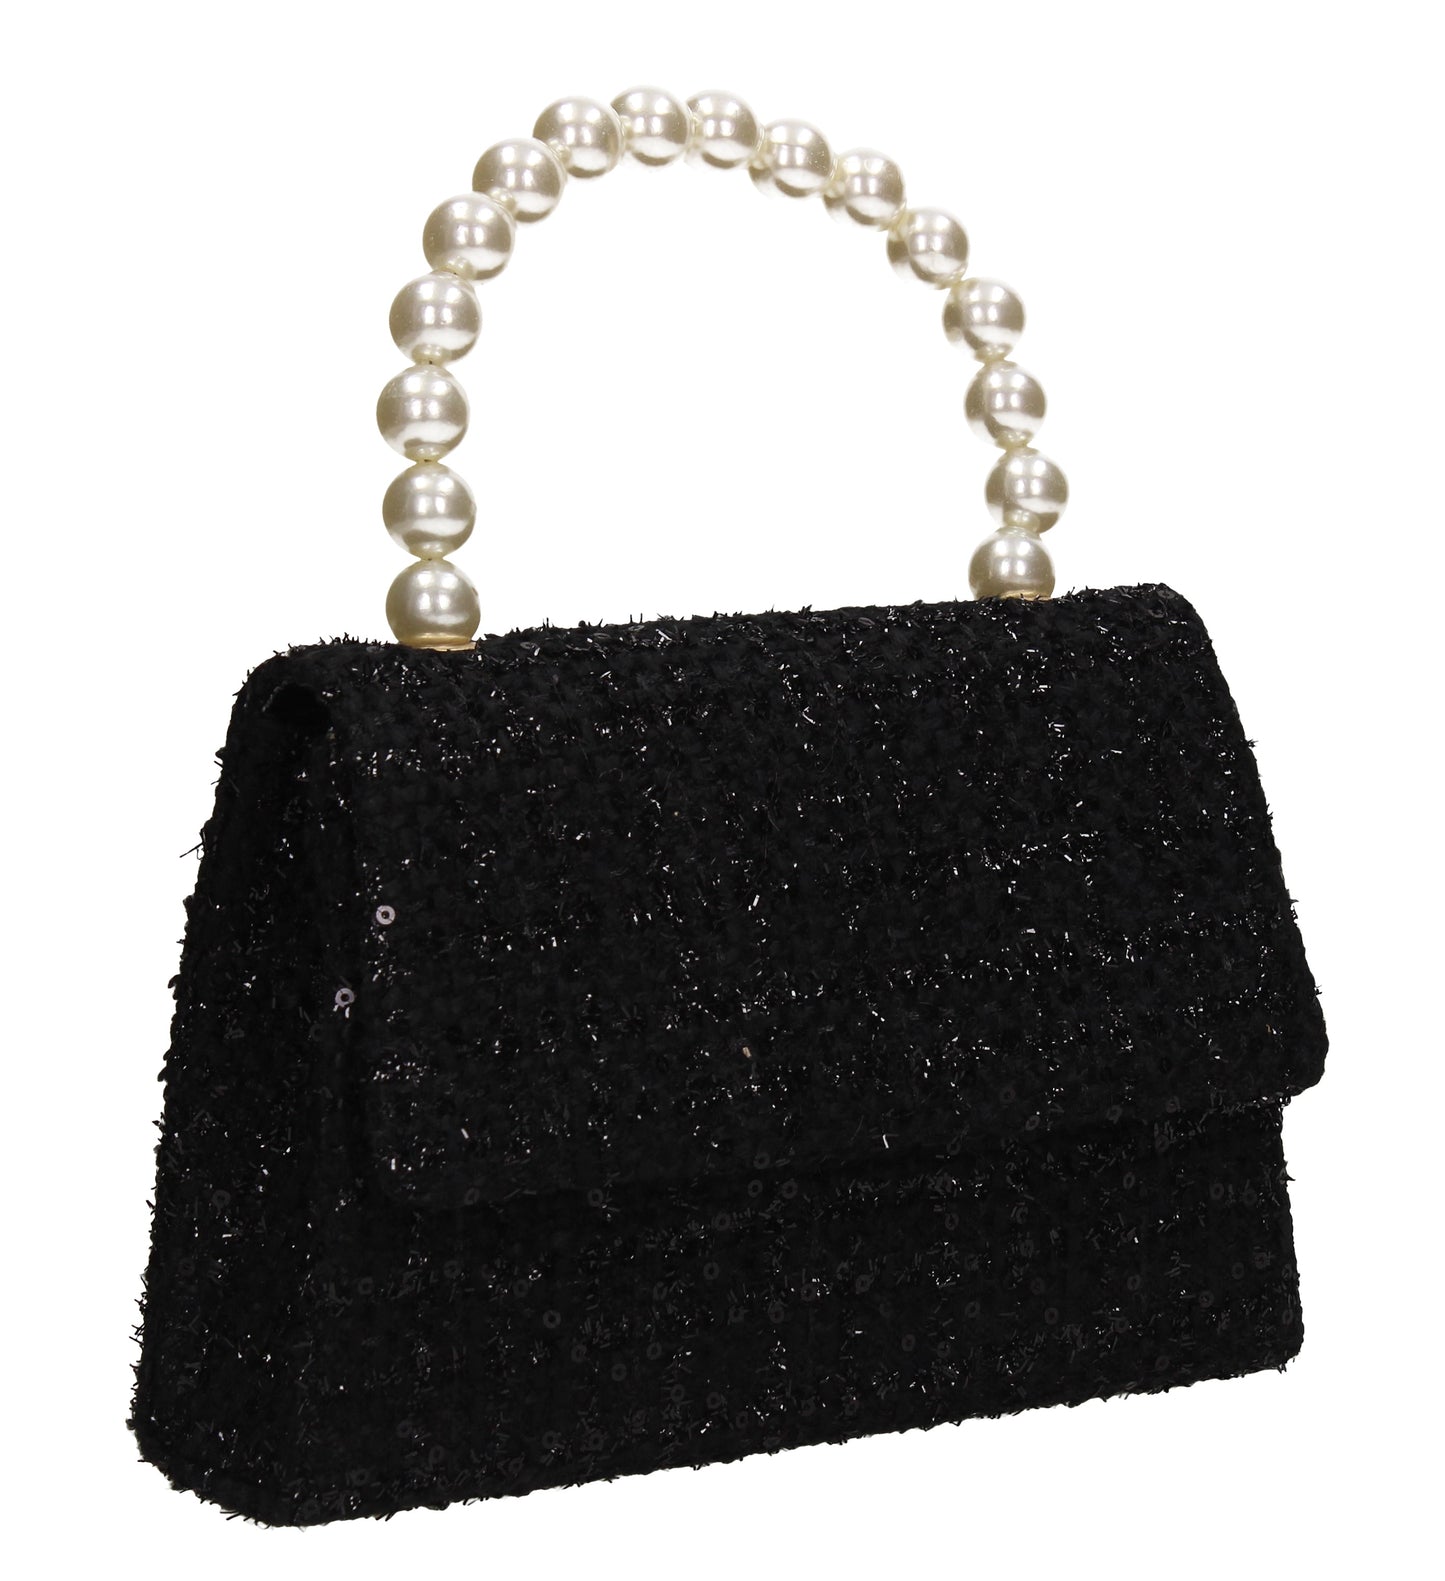 Elliana Synthetic Stitched Effect Flapover Clutch Bag Black